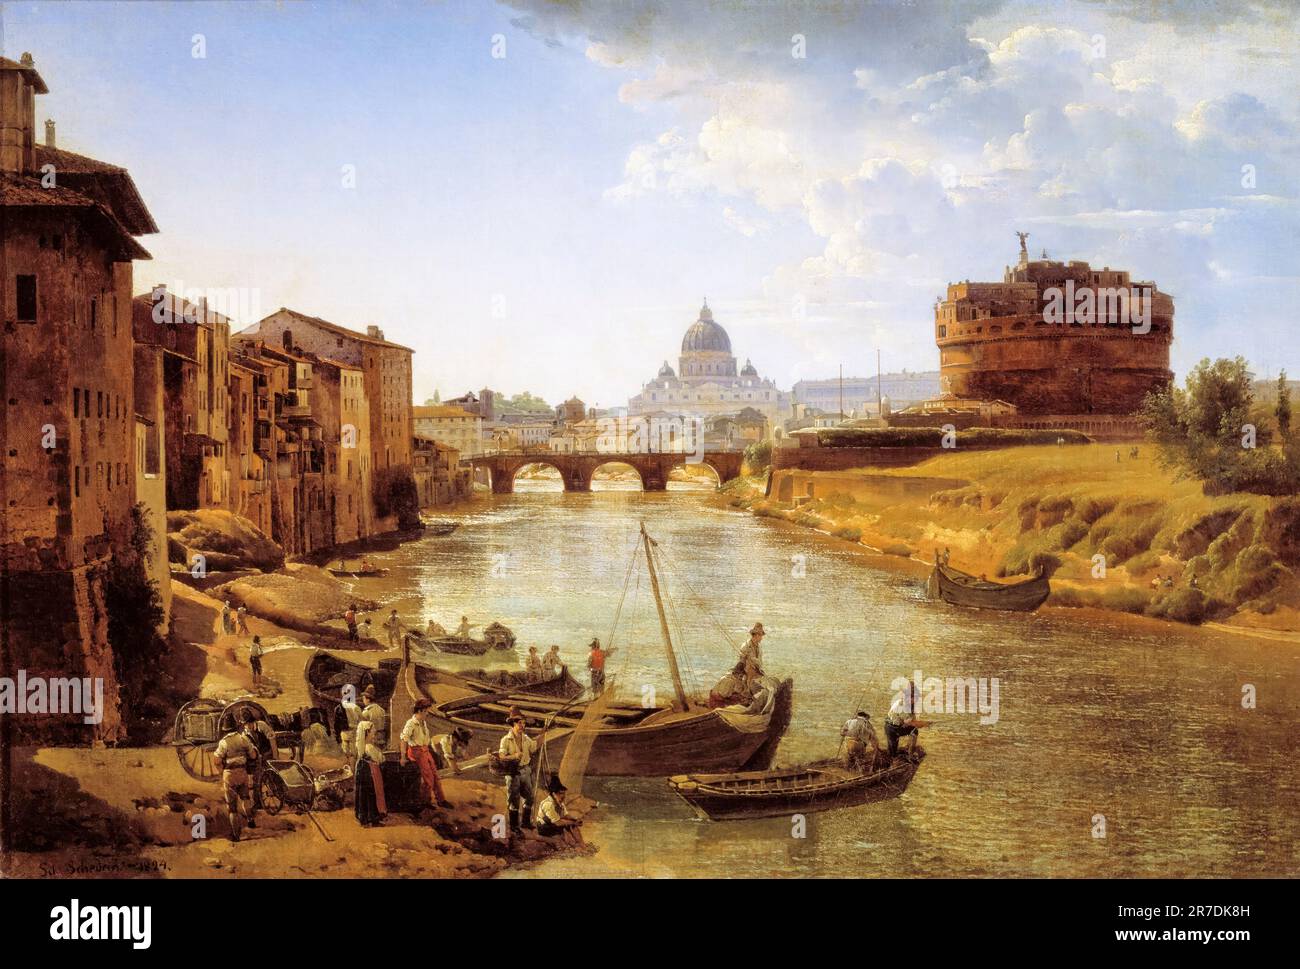 Sylvester Shchedrin, New Rome, The Castle of S,Angelo (Castel Sant'Angelo), landscape painting in oil on canvas, 1824-1825 Stock Photo